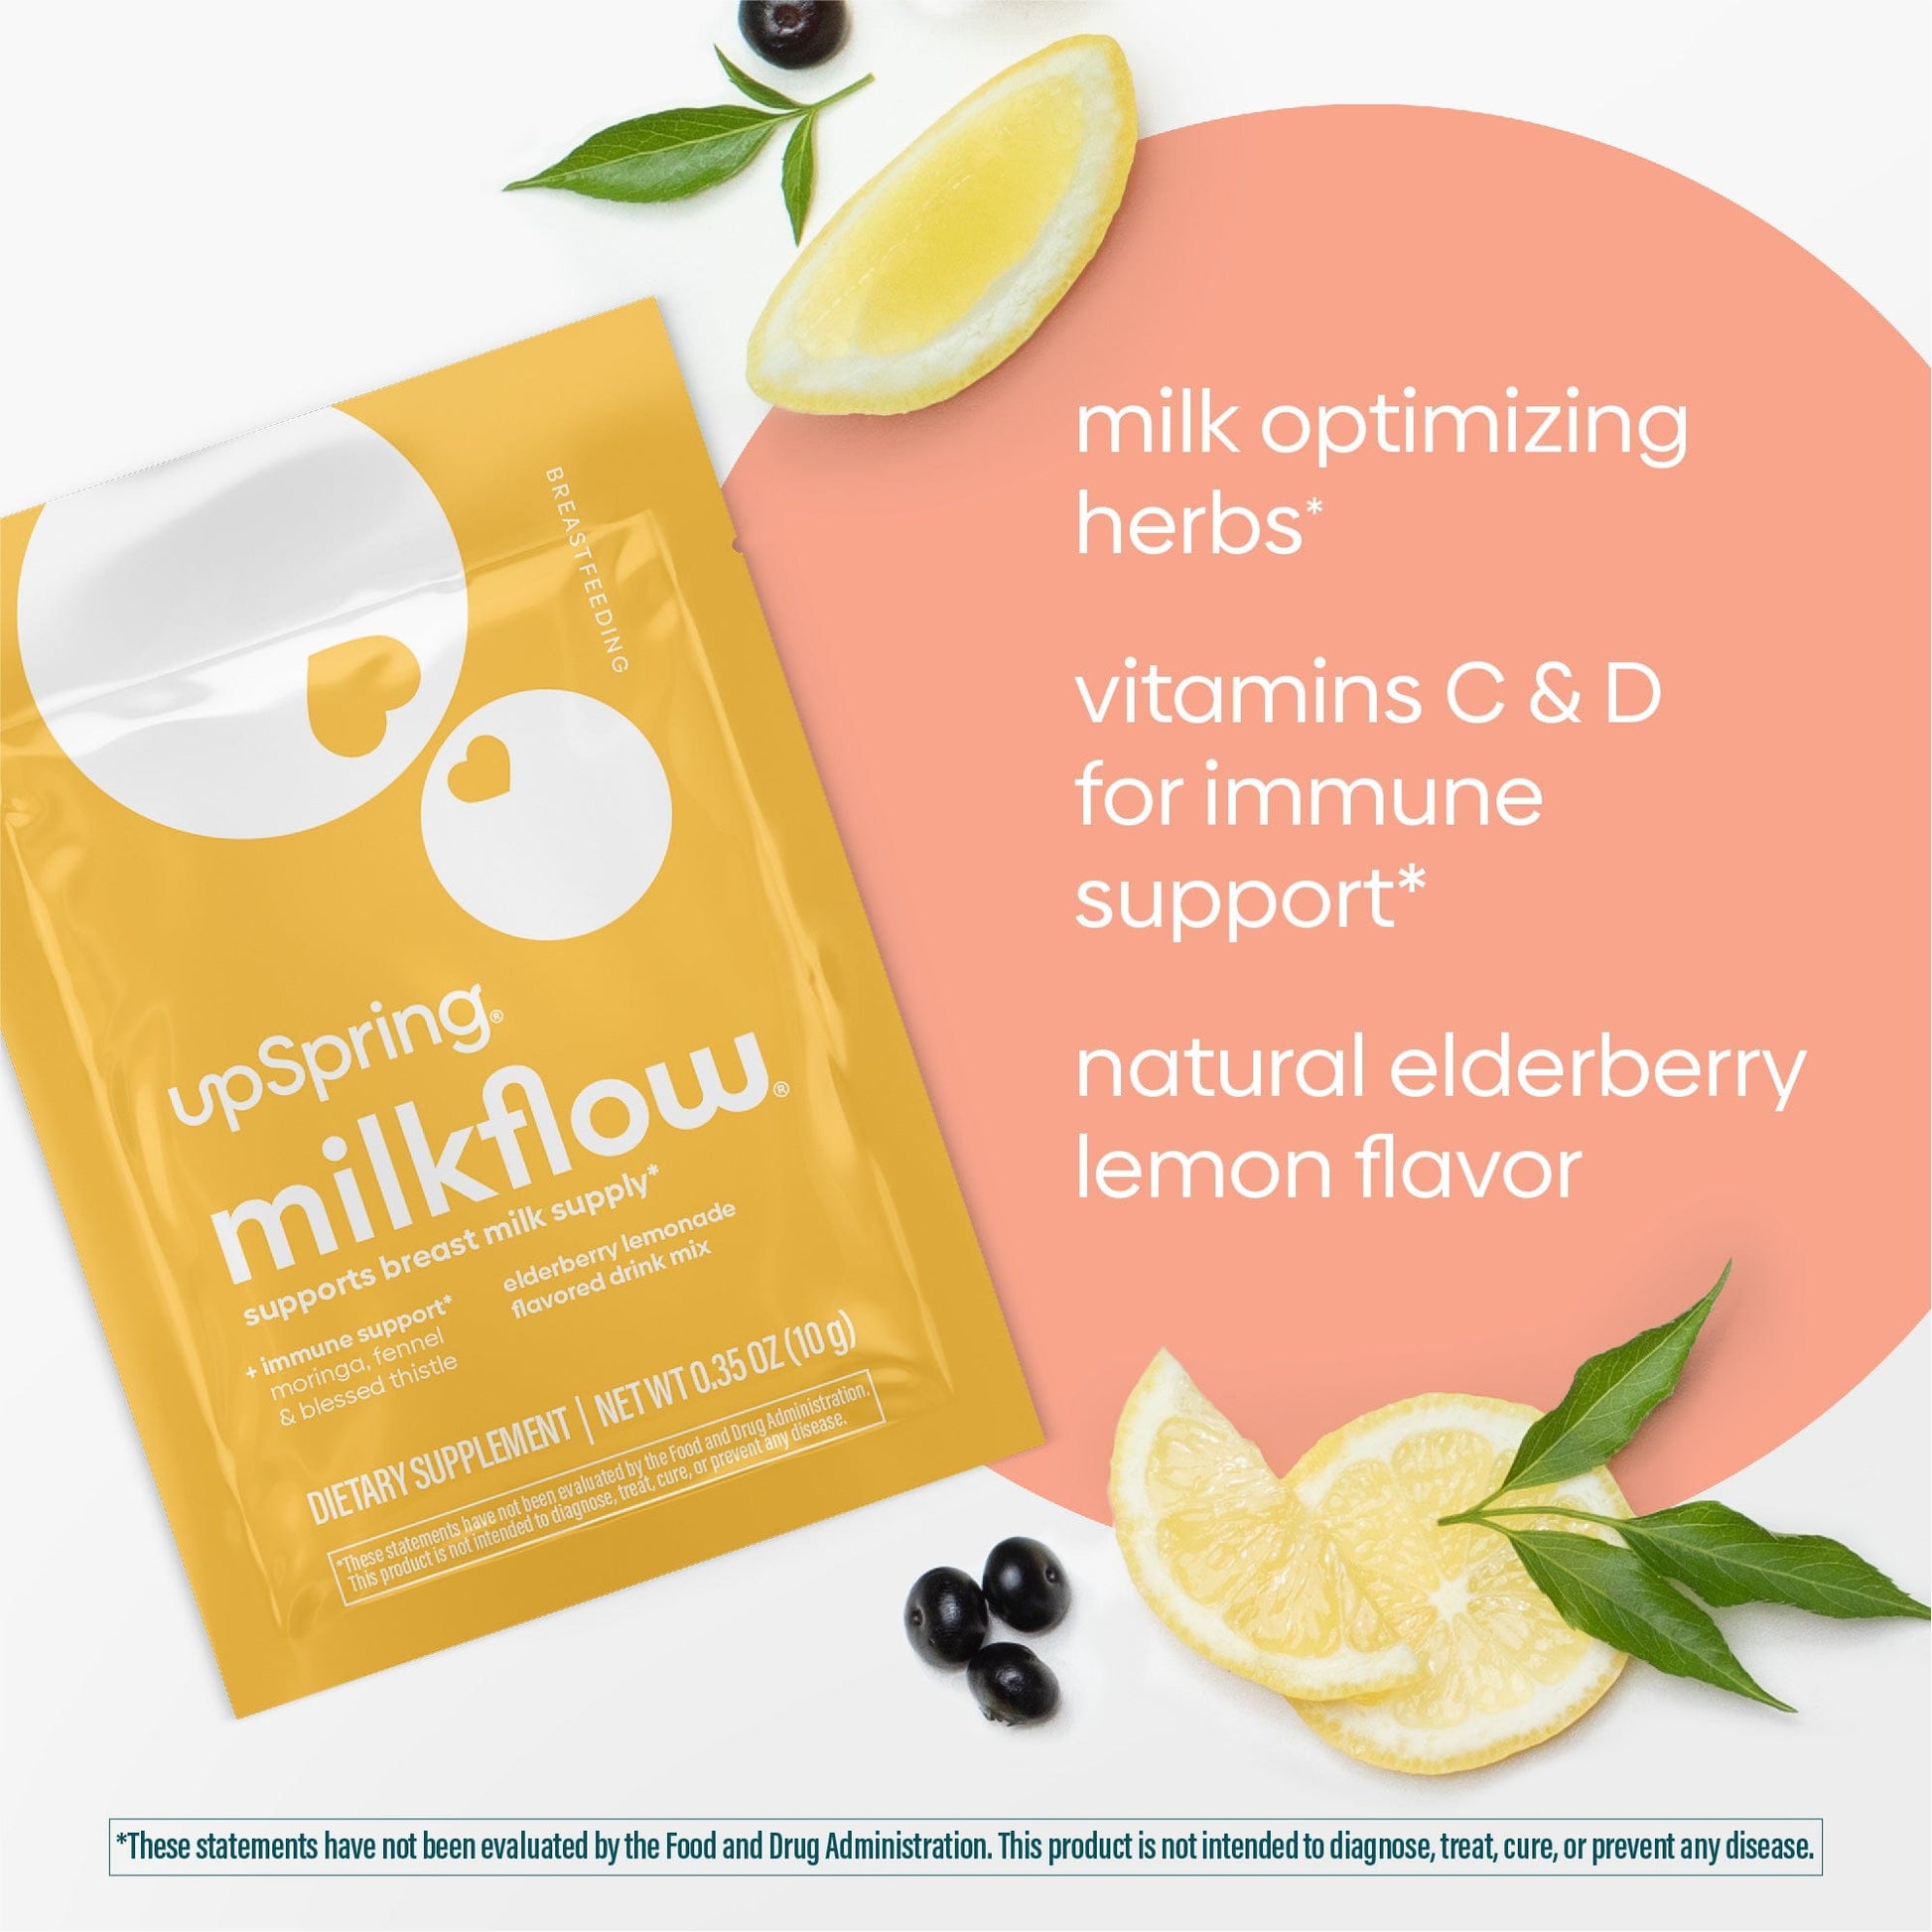 Milkflow + Immune support contains vitamins C and D and milk optimizing herbs